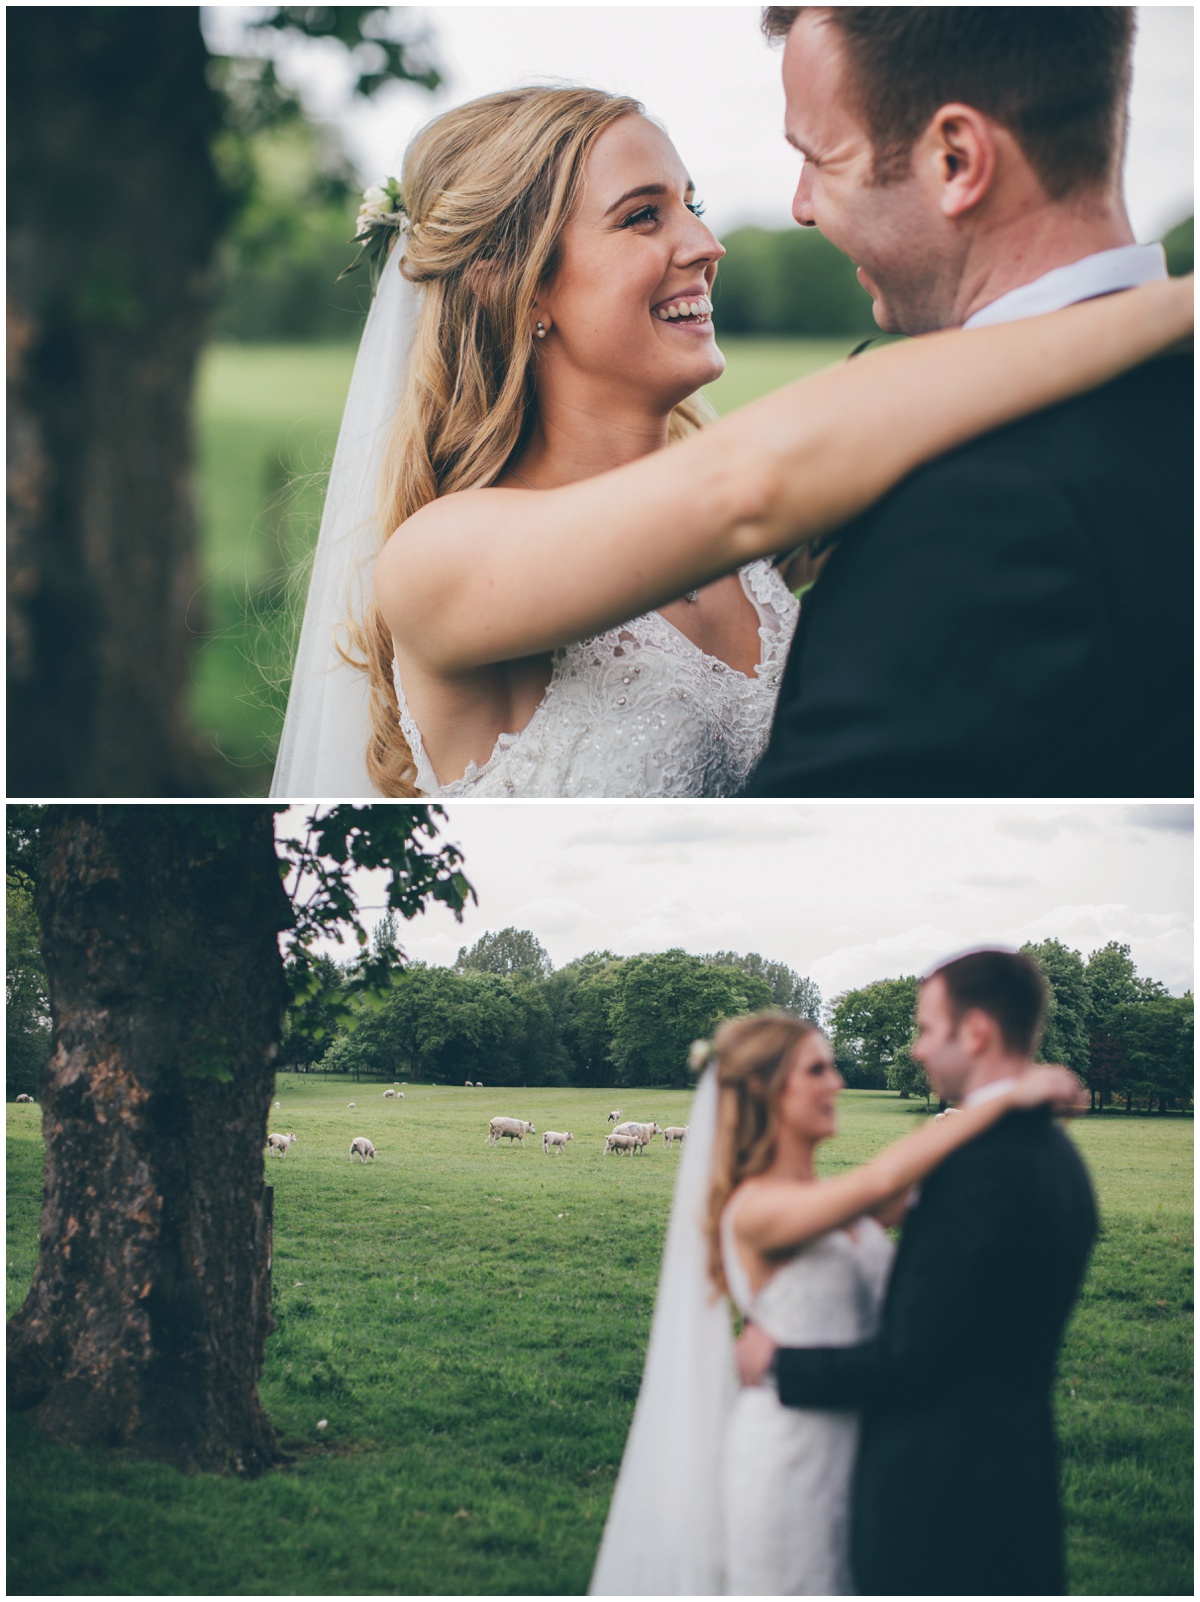 Stunning wedding photographs by Cheshire wedding photographer at Merrydale Manor, new venue, close to Manchester.